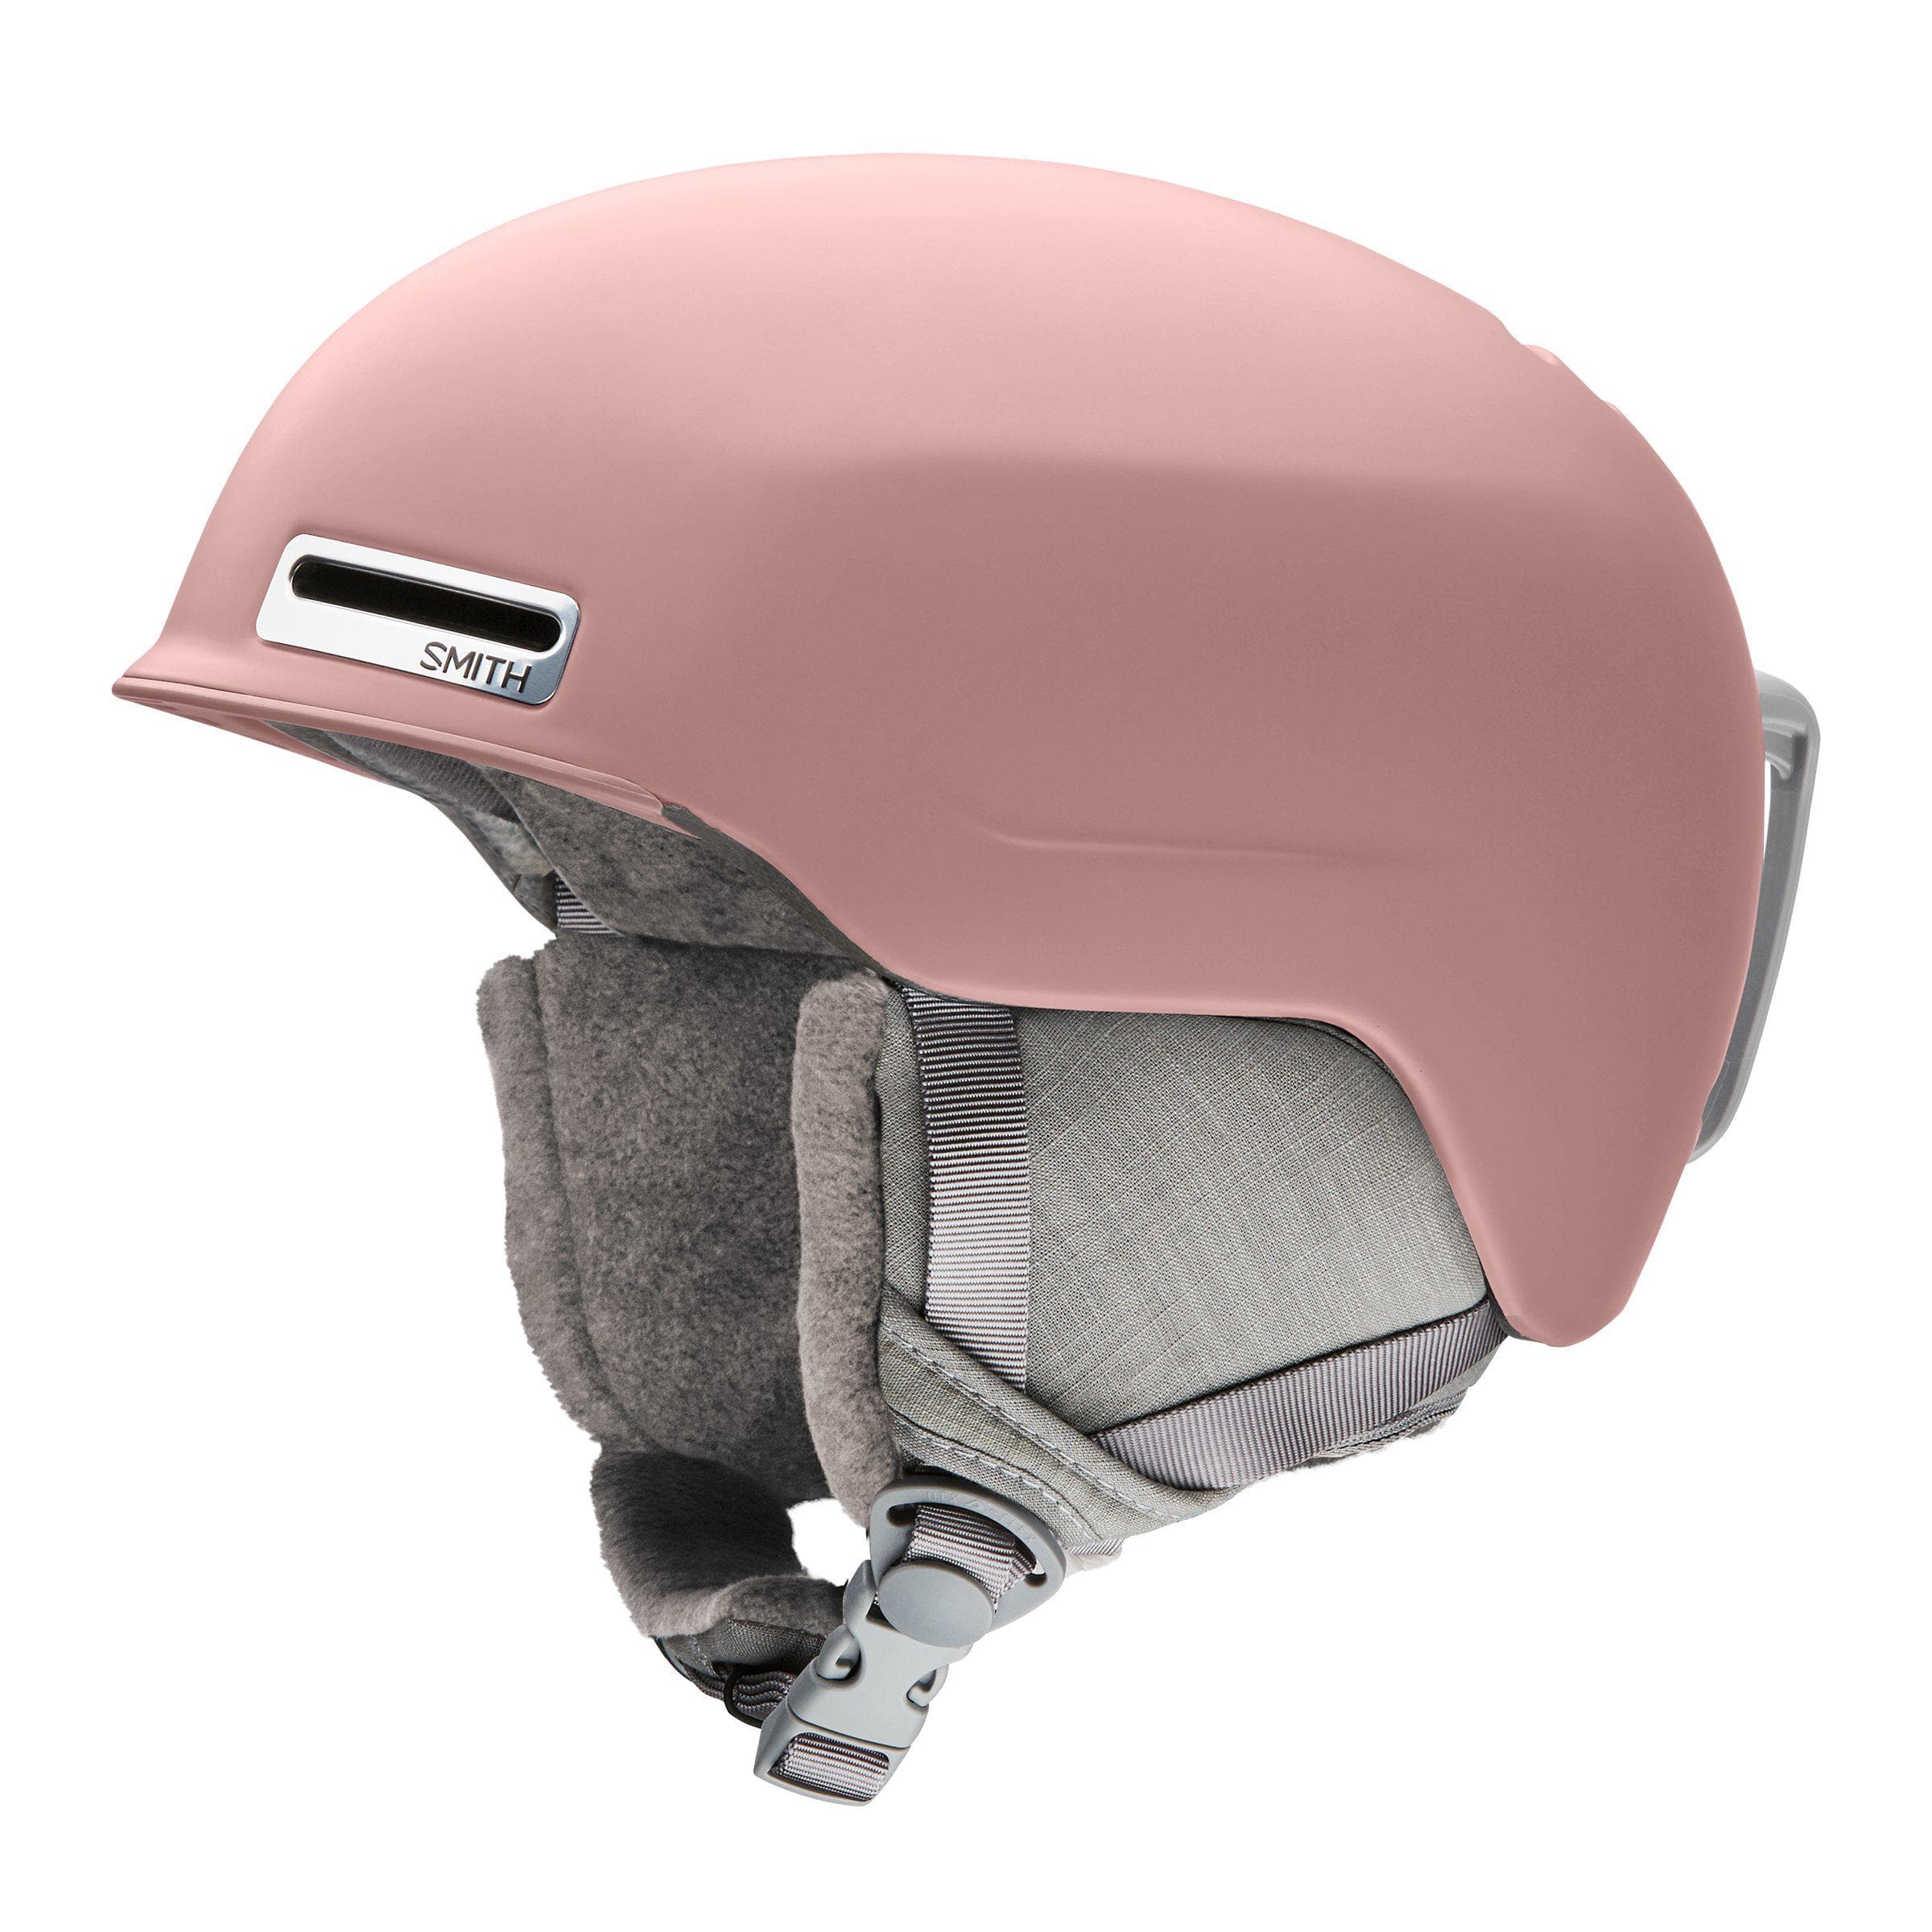 Smith Allure Asian Fit Womens Helmet 2021 – The Last Lift